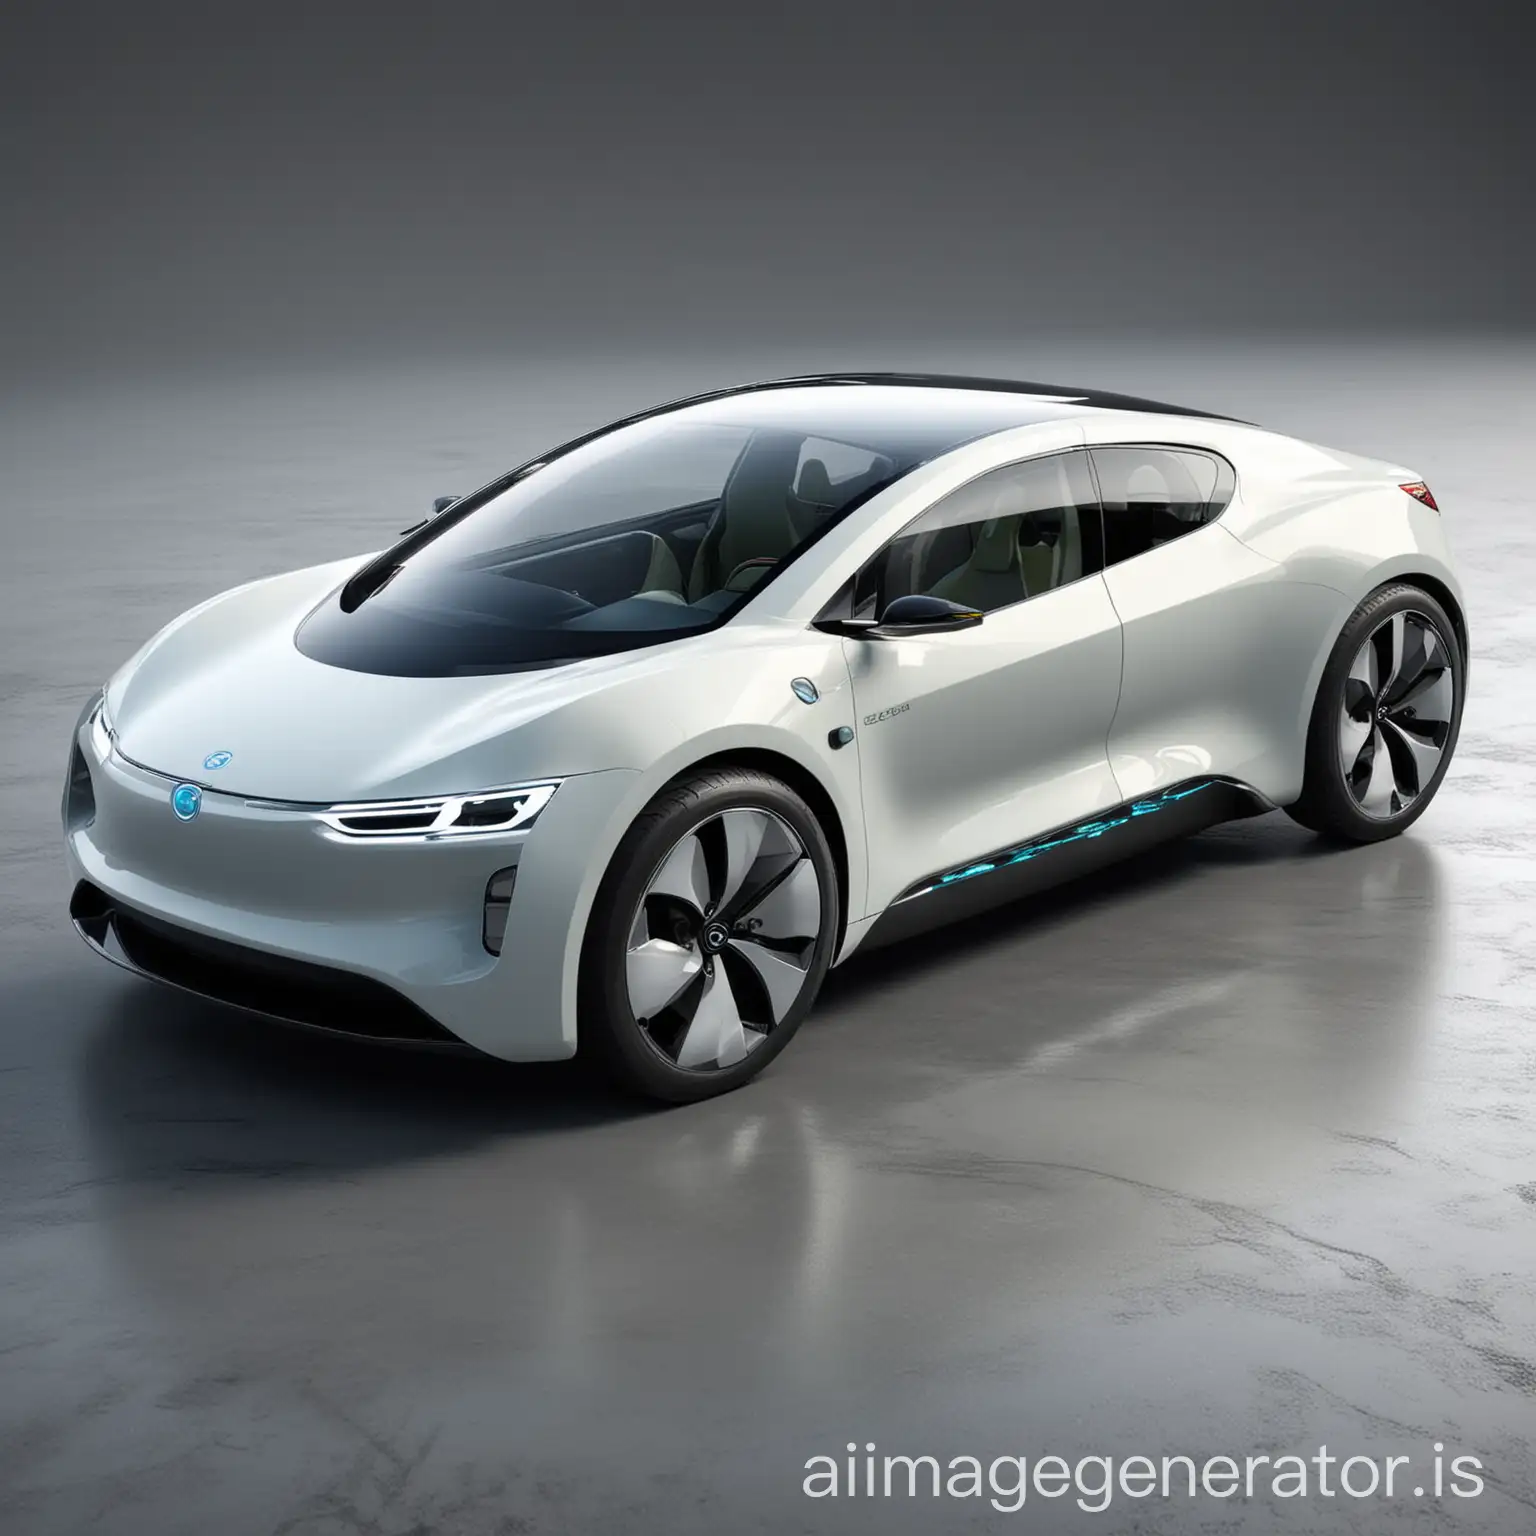 Futuristic-EcoFriendly-Electric-Car-with-Advanced-Technology